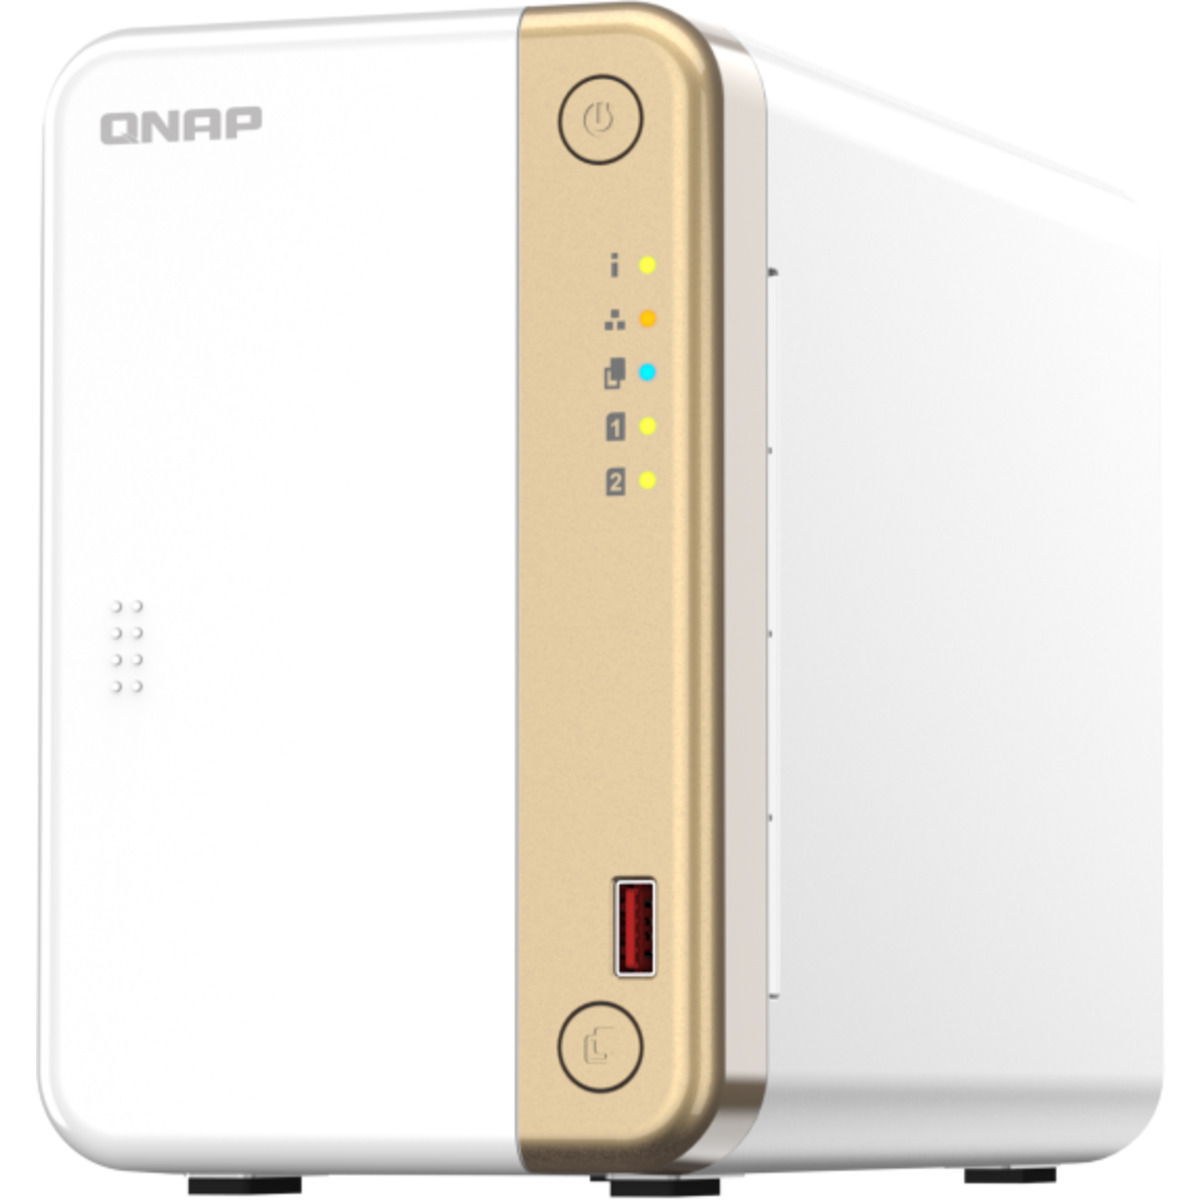 QNAP TS-262 NAS - Network Attached Storage Device Burn-In Tested Configurations